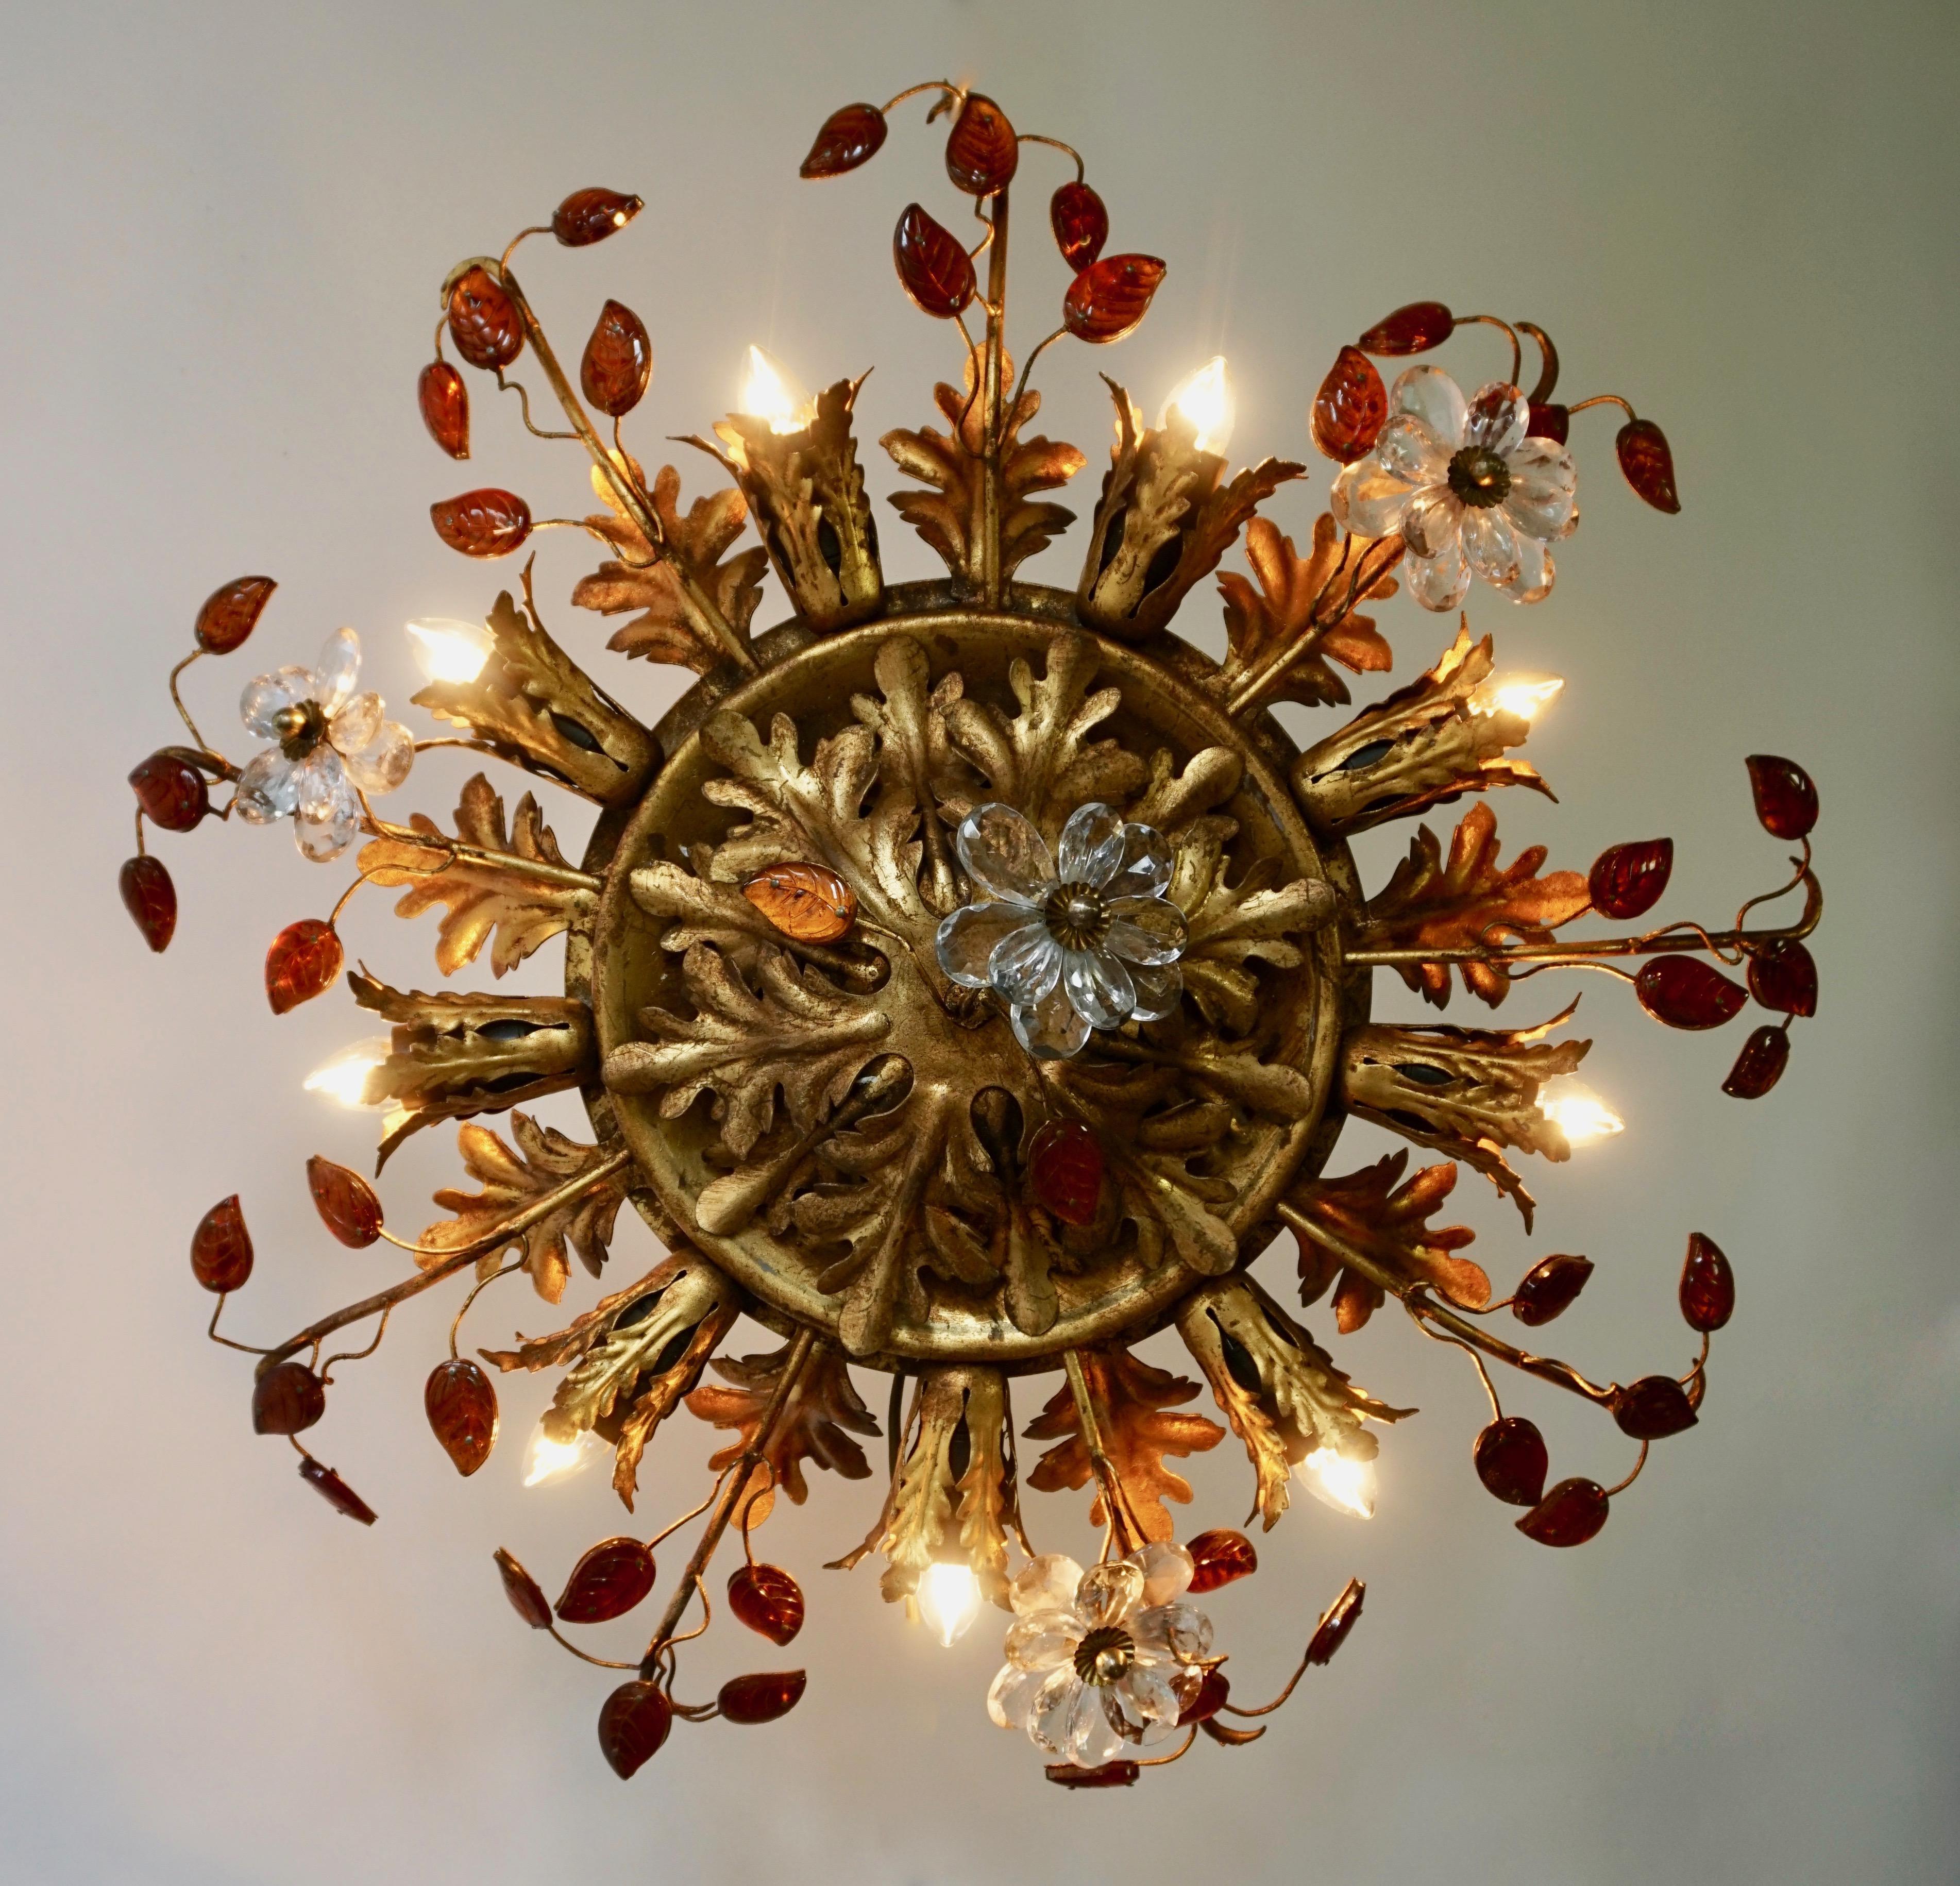 Beautiful flush mount fixture which can be used also as wall sconce - this Italian gilt metal light with gilt metals leaves, small orange glass leaves and transparent flowers is gorgeous! The light fixture has 9-light bulb holders spread around as a